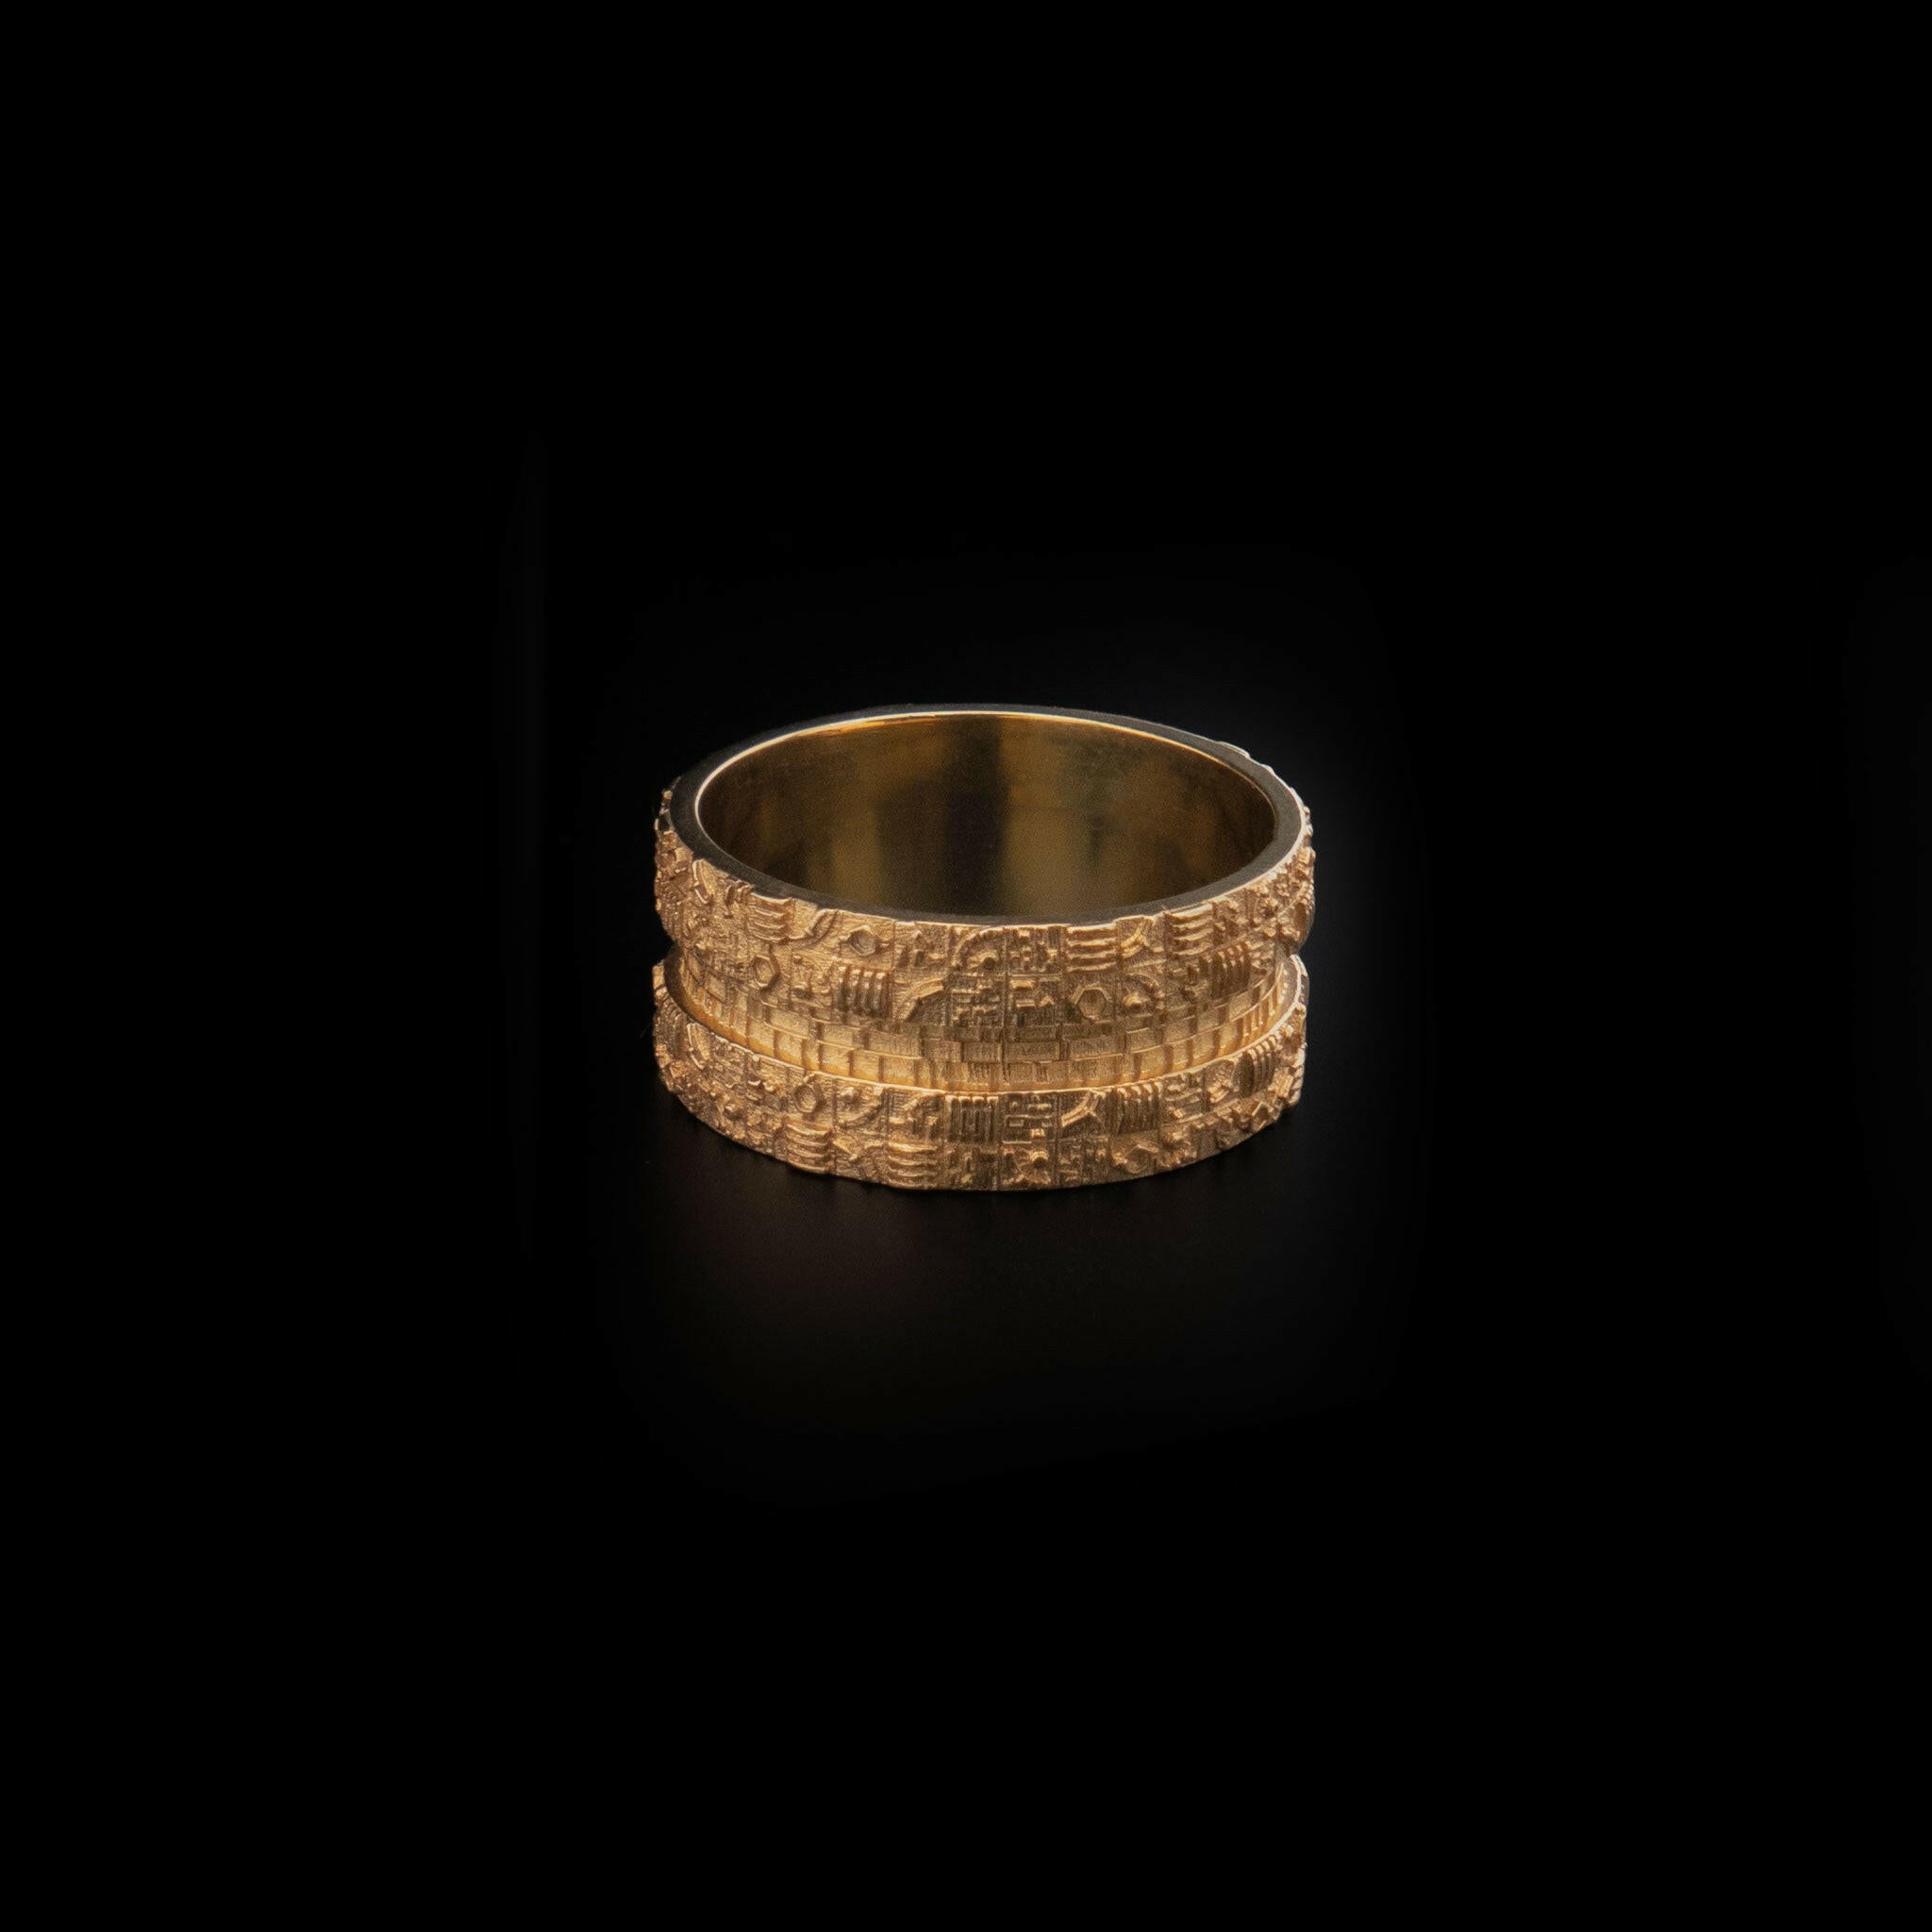 Gold death star ring